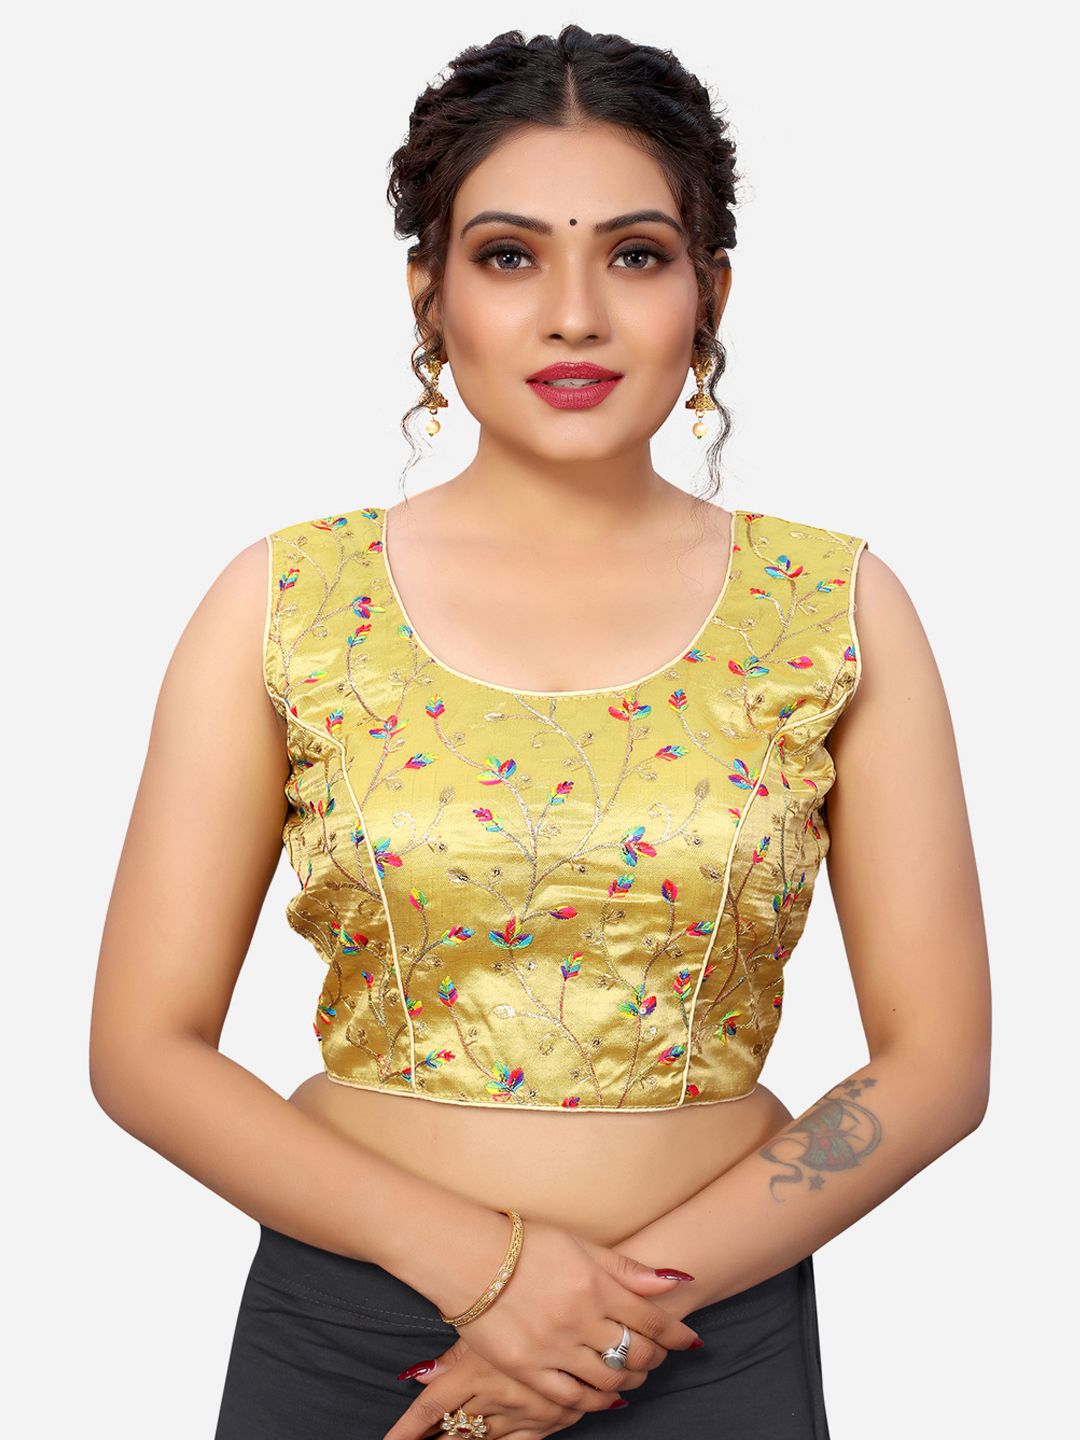 SIRIL Gold Embroidered Silk Saree Blouse Price in India